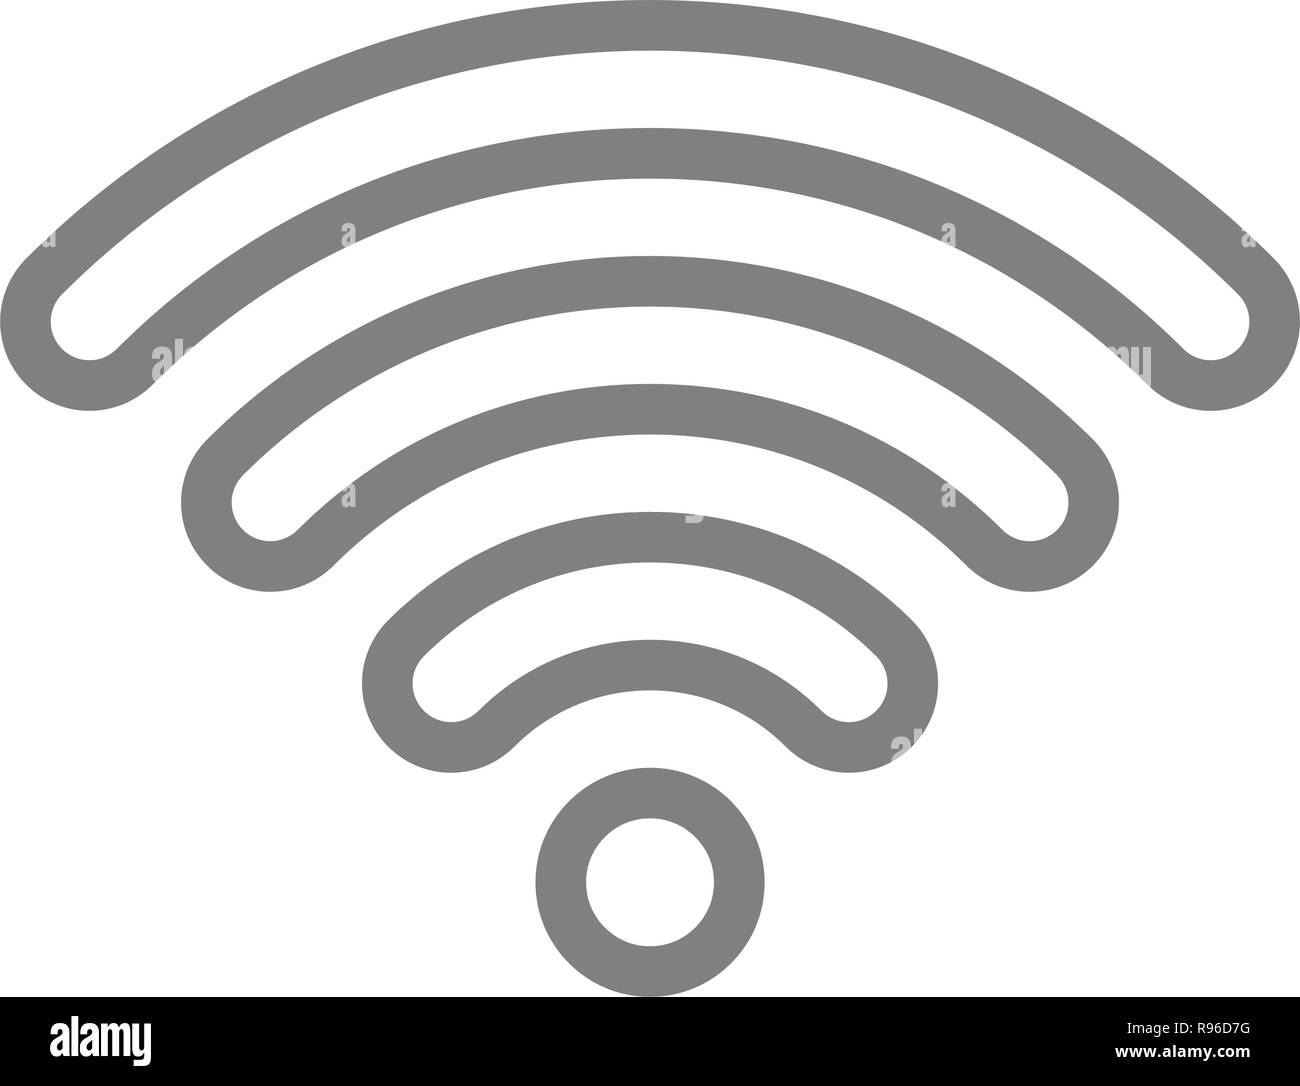 Wifi symbol icon - medium gray outlined rounded, isolated - vector illustration Stock Vector